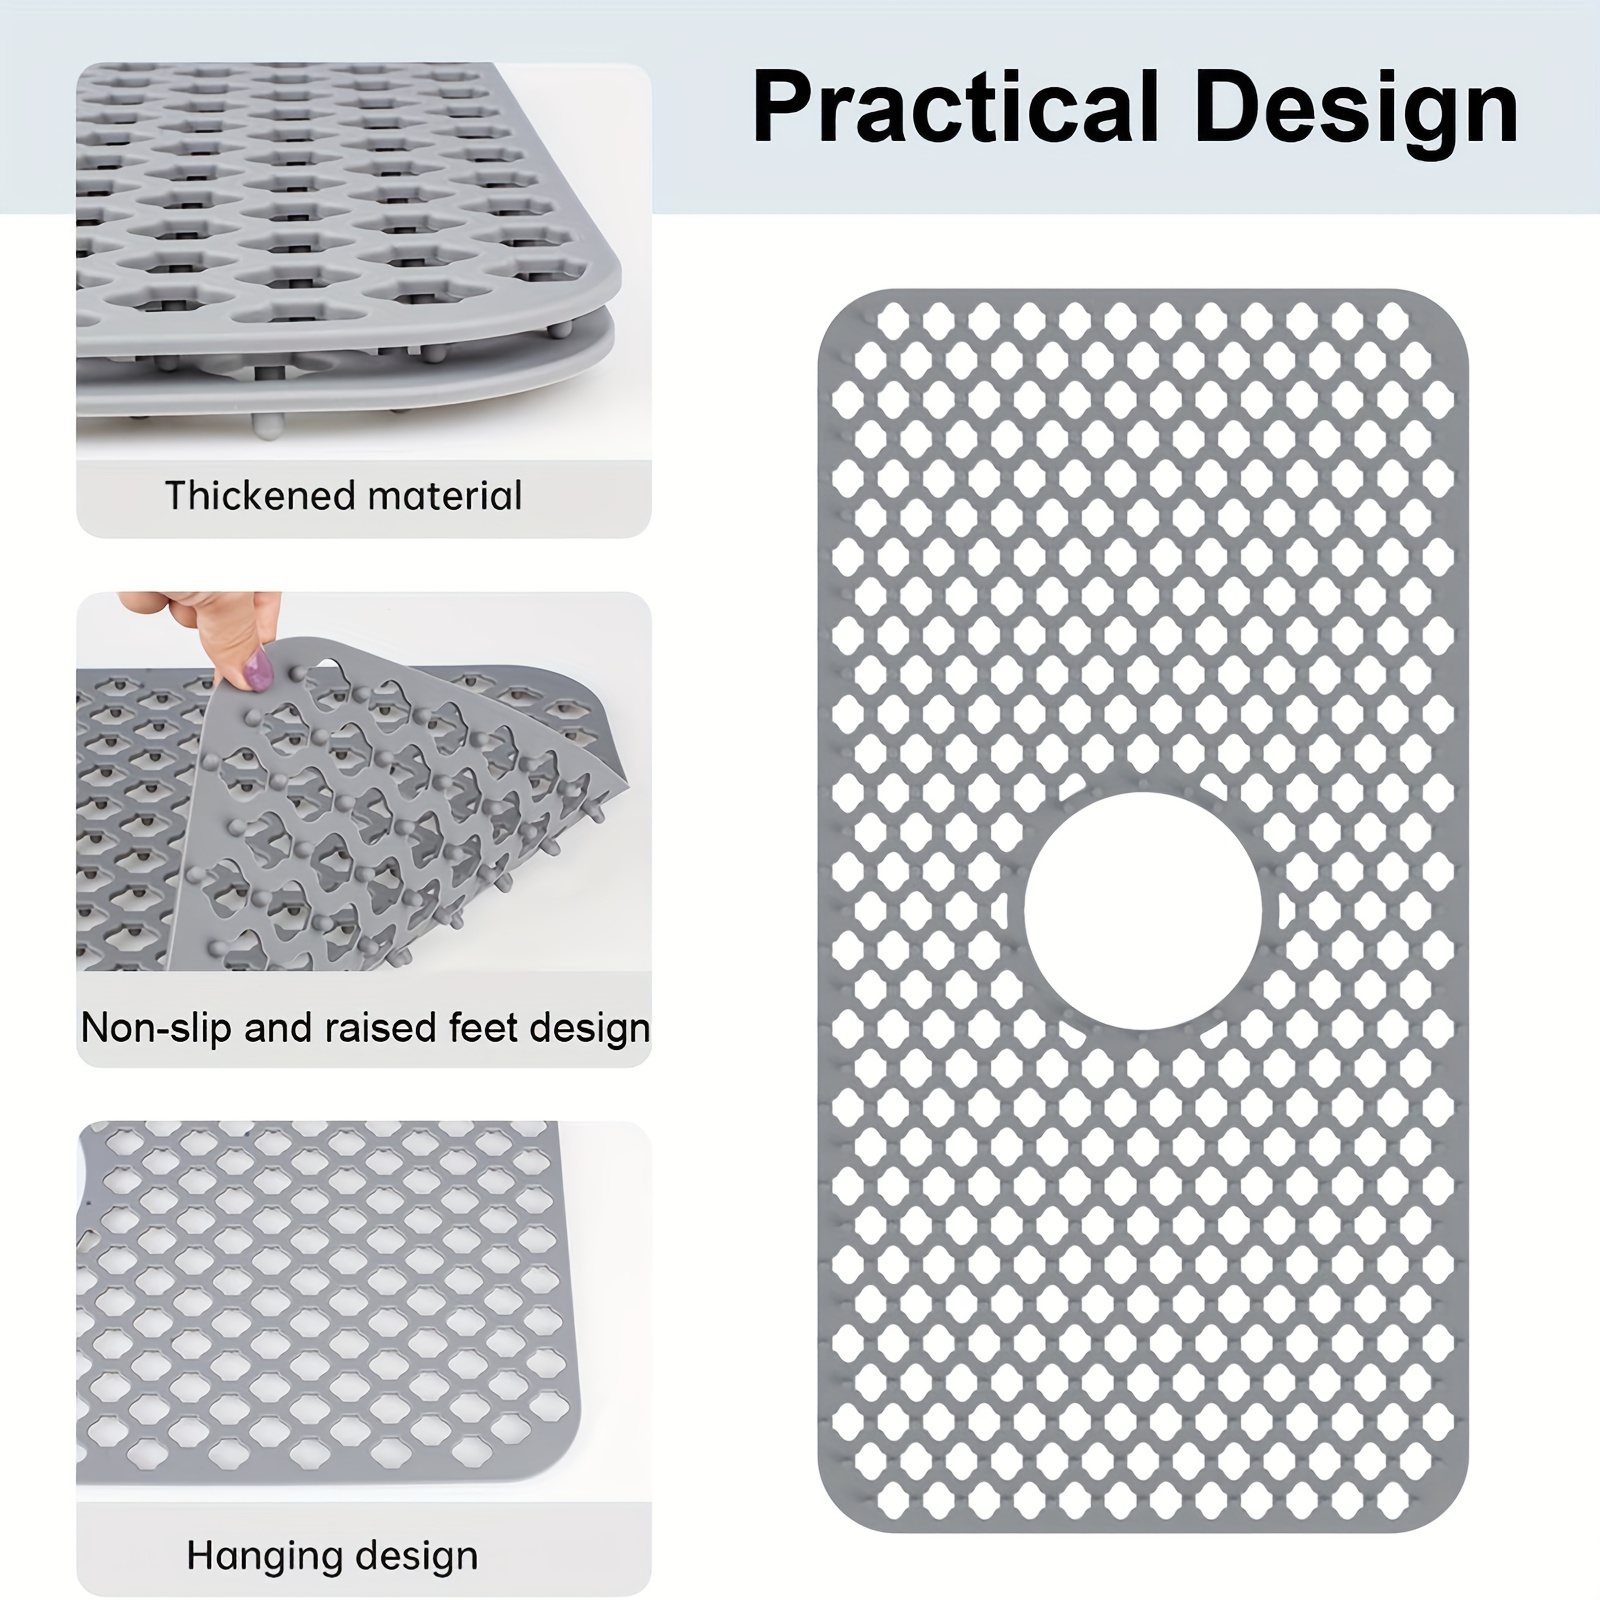 Oavqhlg3b Silicone Sink Protector, Rear Drain Kitchen Sink Mats Grid Accessory,Folding Non-Slip Sink Mat for Bottom of Farmhouse Stainless Steel